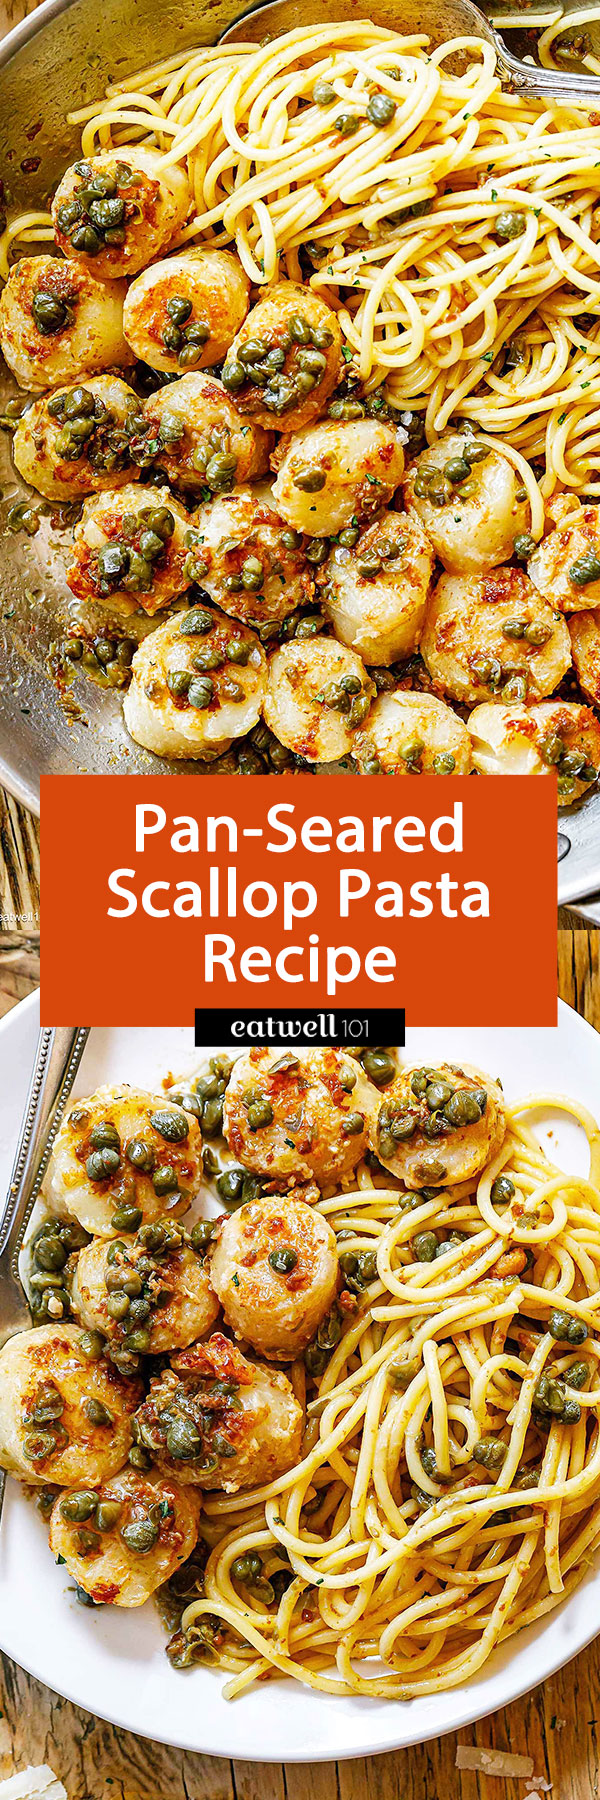 Pan-Seared Scallop Pasta - #scallops #pasta #recipe #eatwell101 - Scallop pasta are so easy to make at home! This pasta dinner with sea scallops is a perfect date-night recipe and comes together in just 20 minutes!